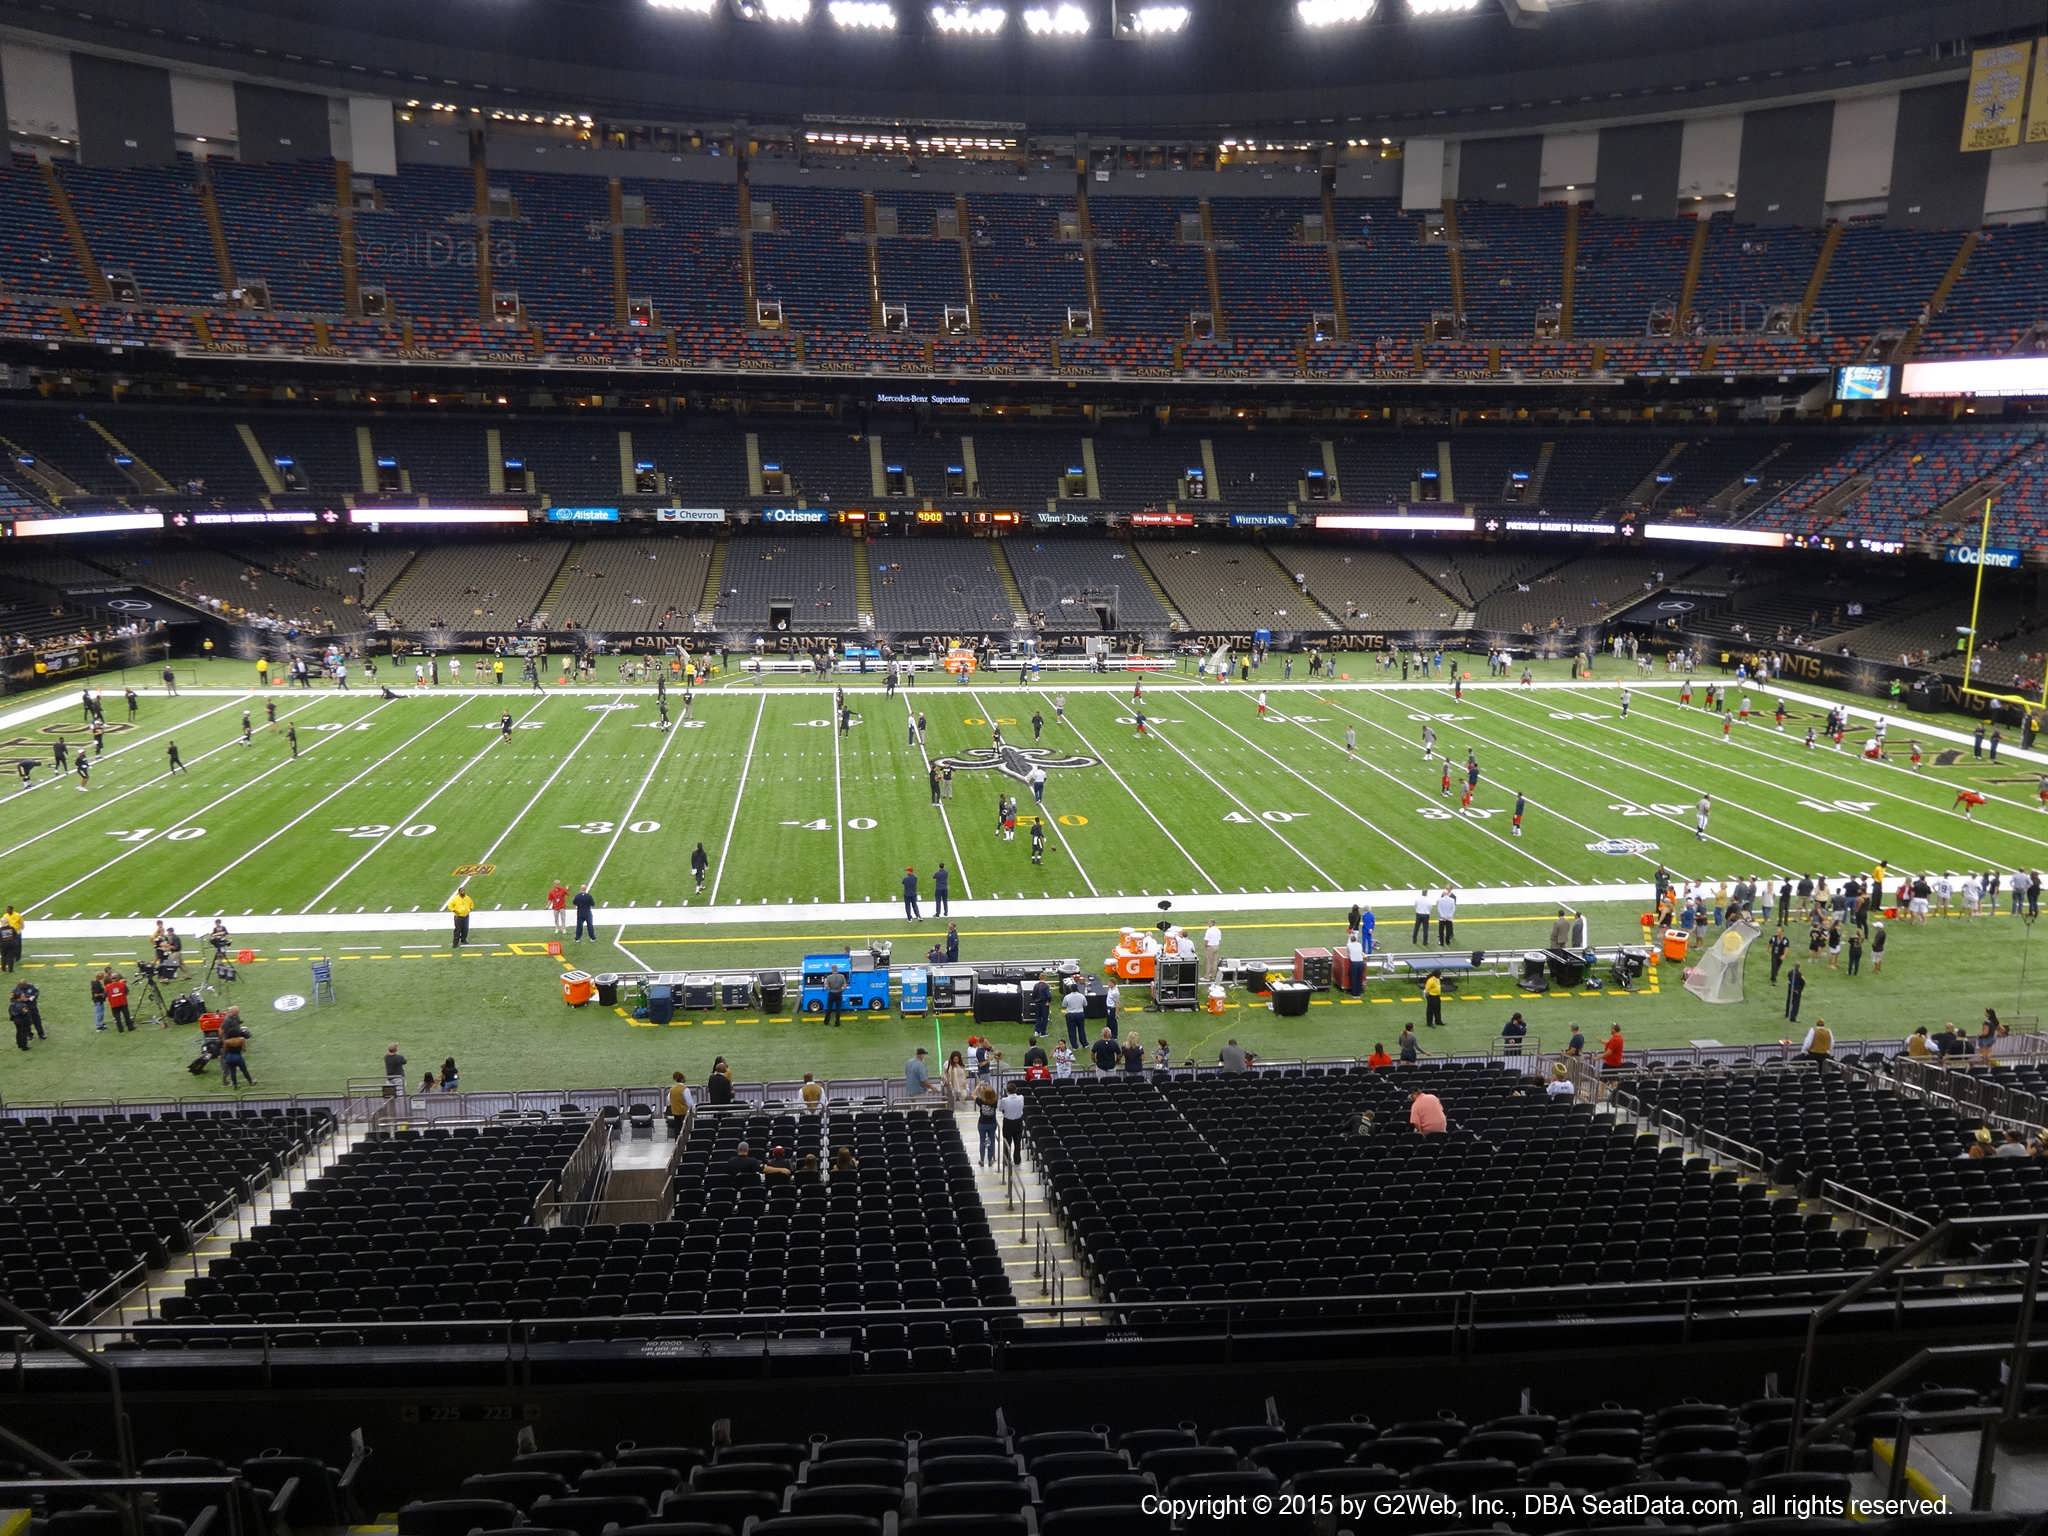 Seat view from section 313 at the Mercedes-Benz Superdome, home of the New Orleans Saints